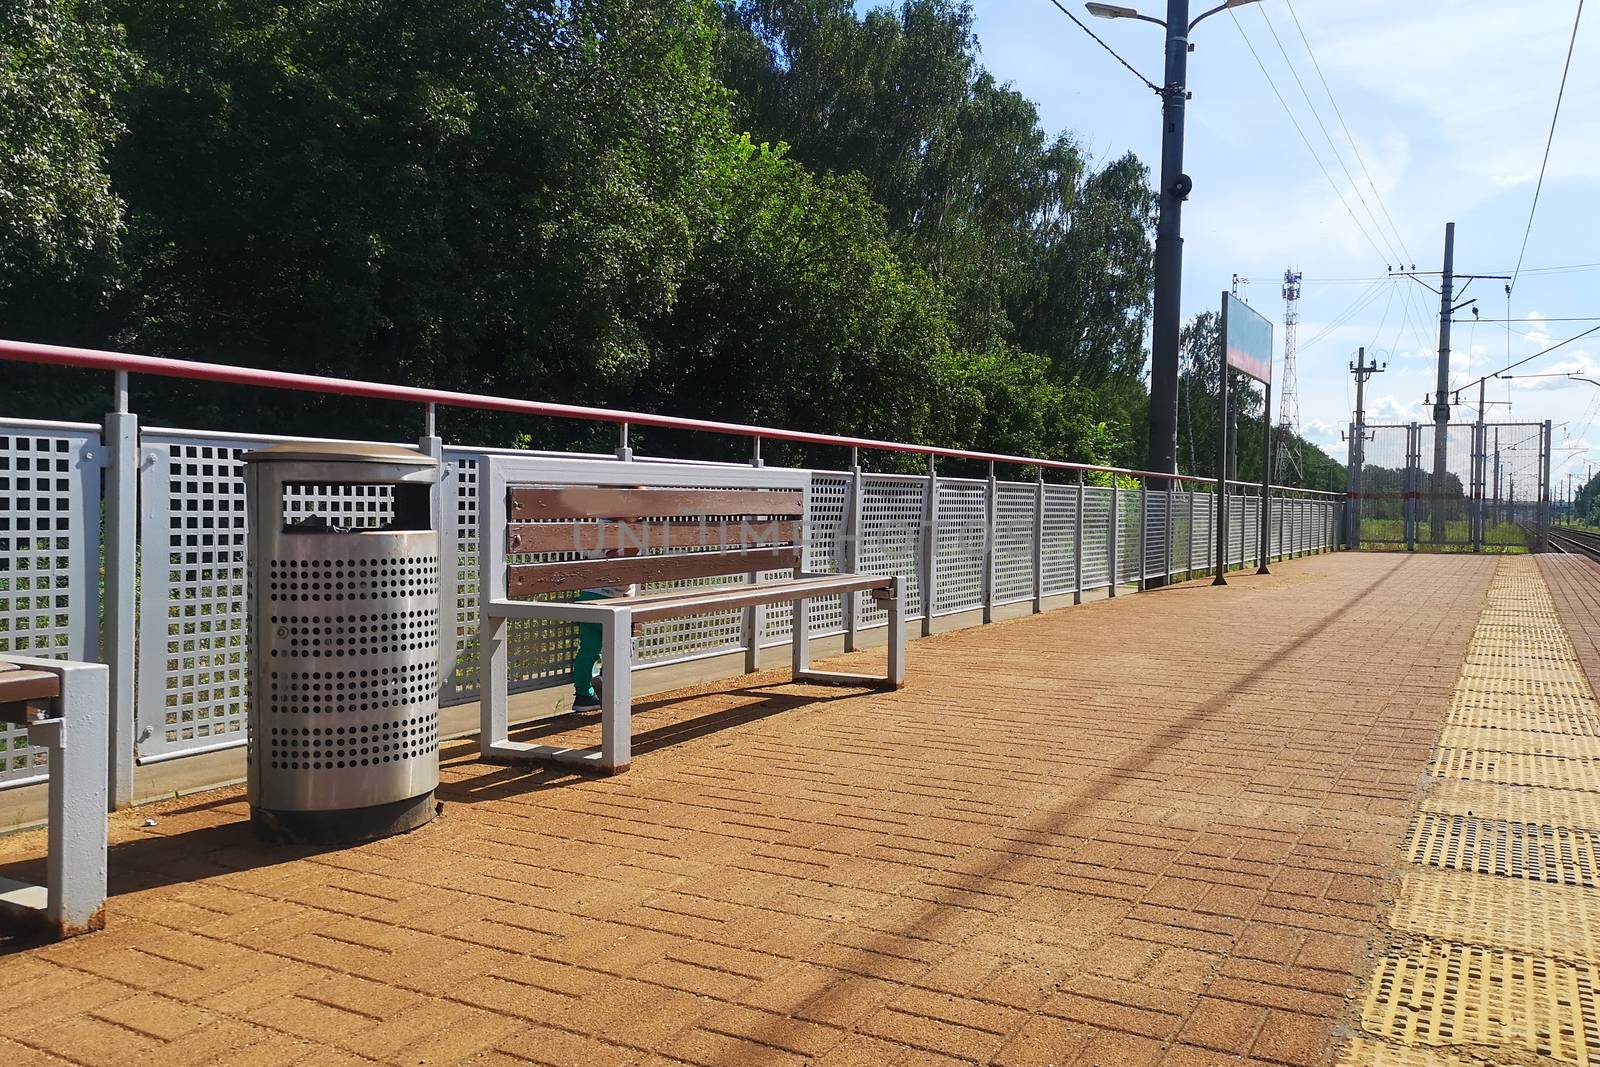 Railway station with benches and trash cans by galinasharapova